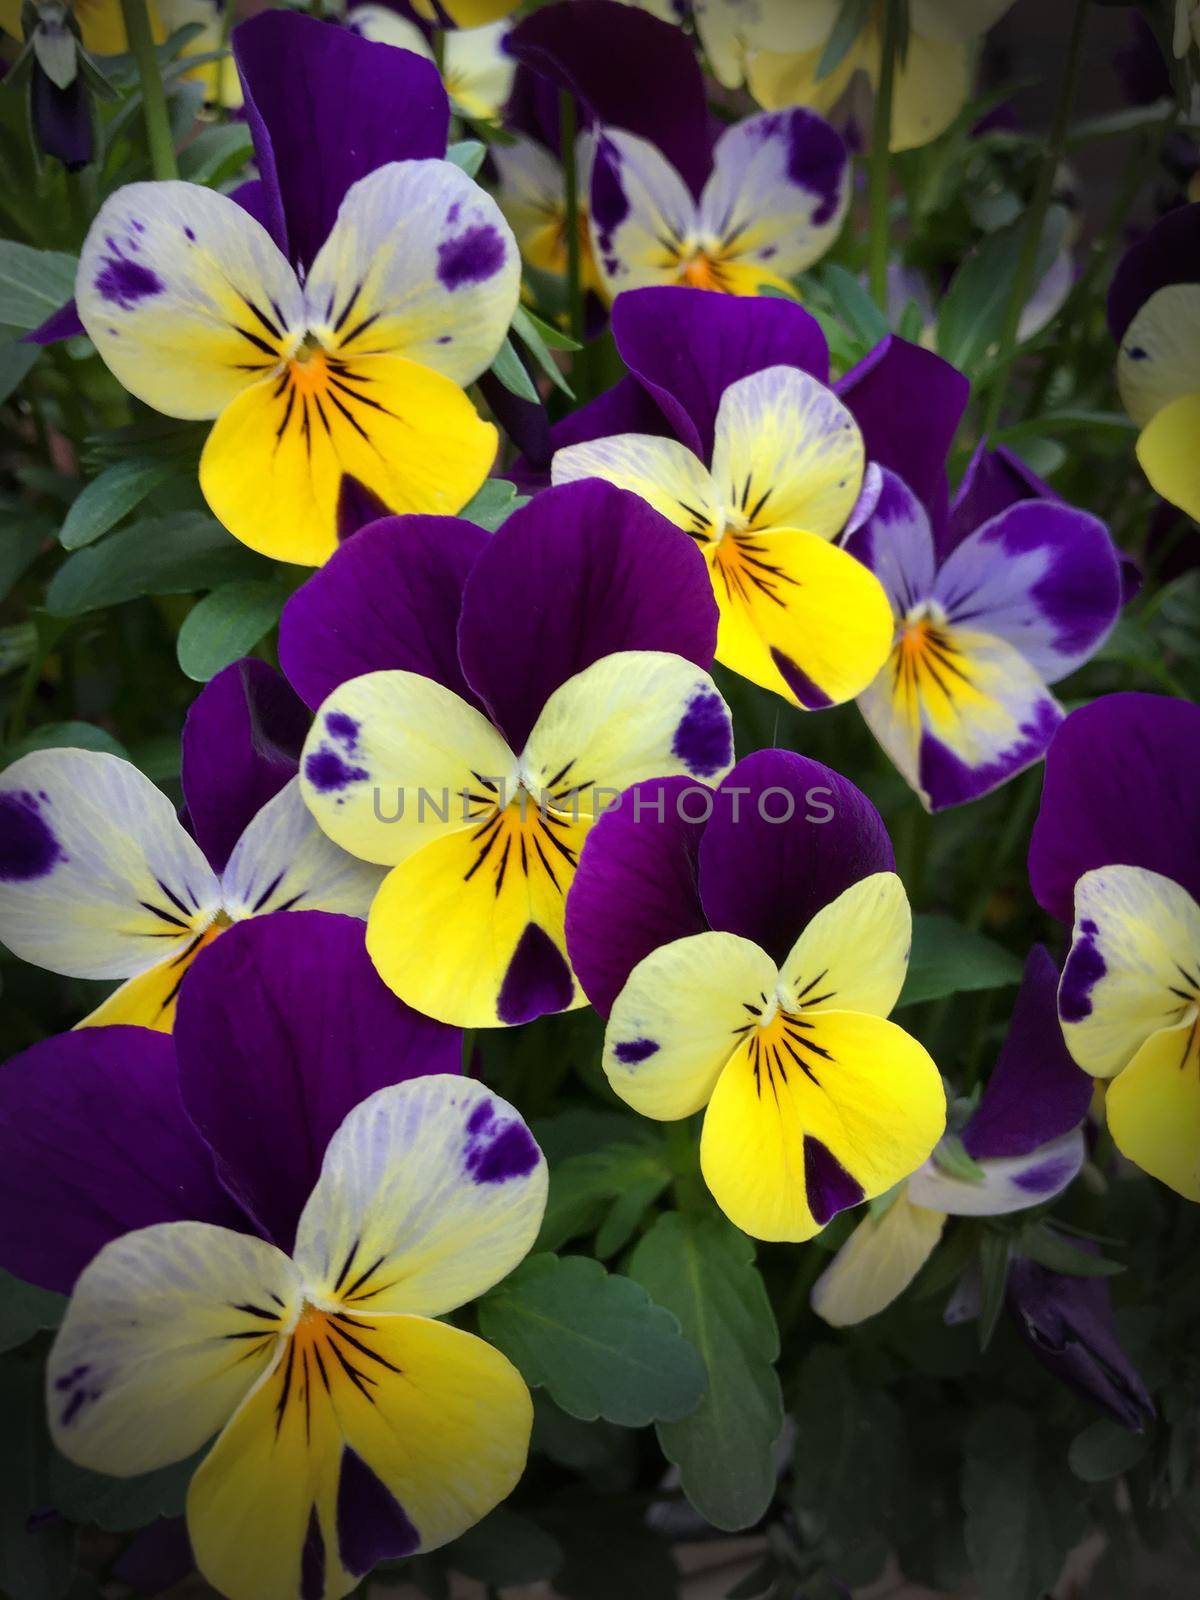 A bouquet of yellow and purple viola flowers or pansies. In the picture are several blooming flowers visible.